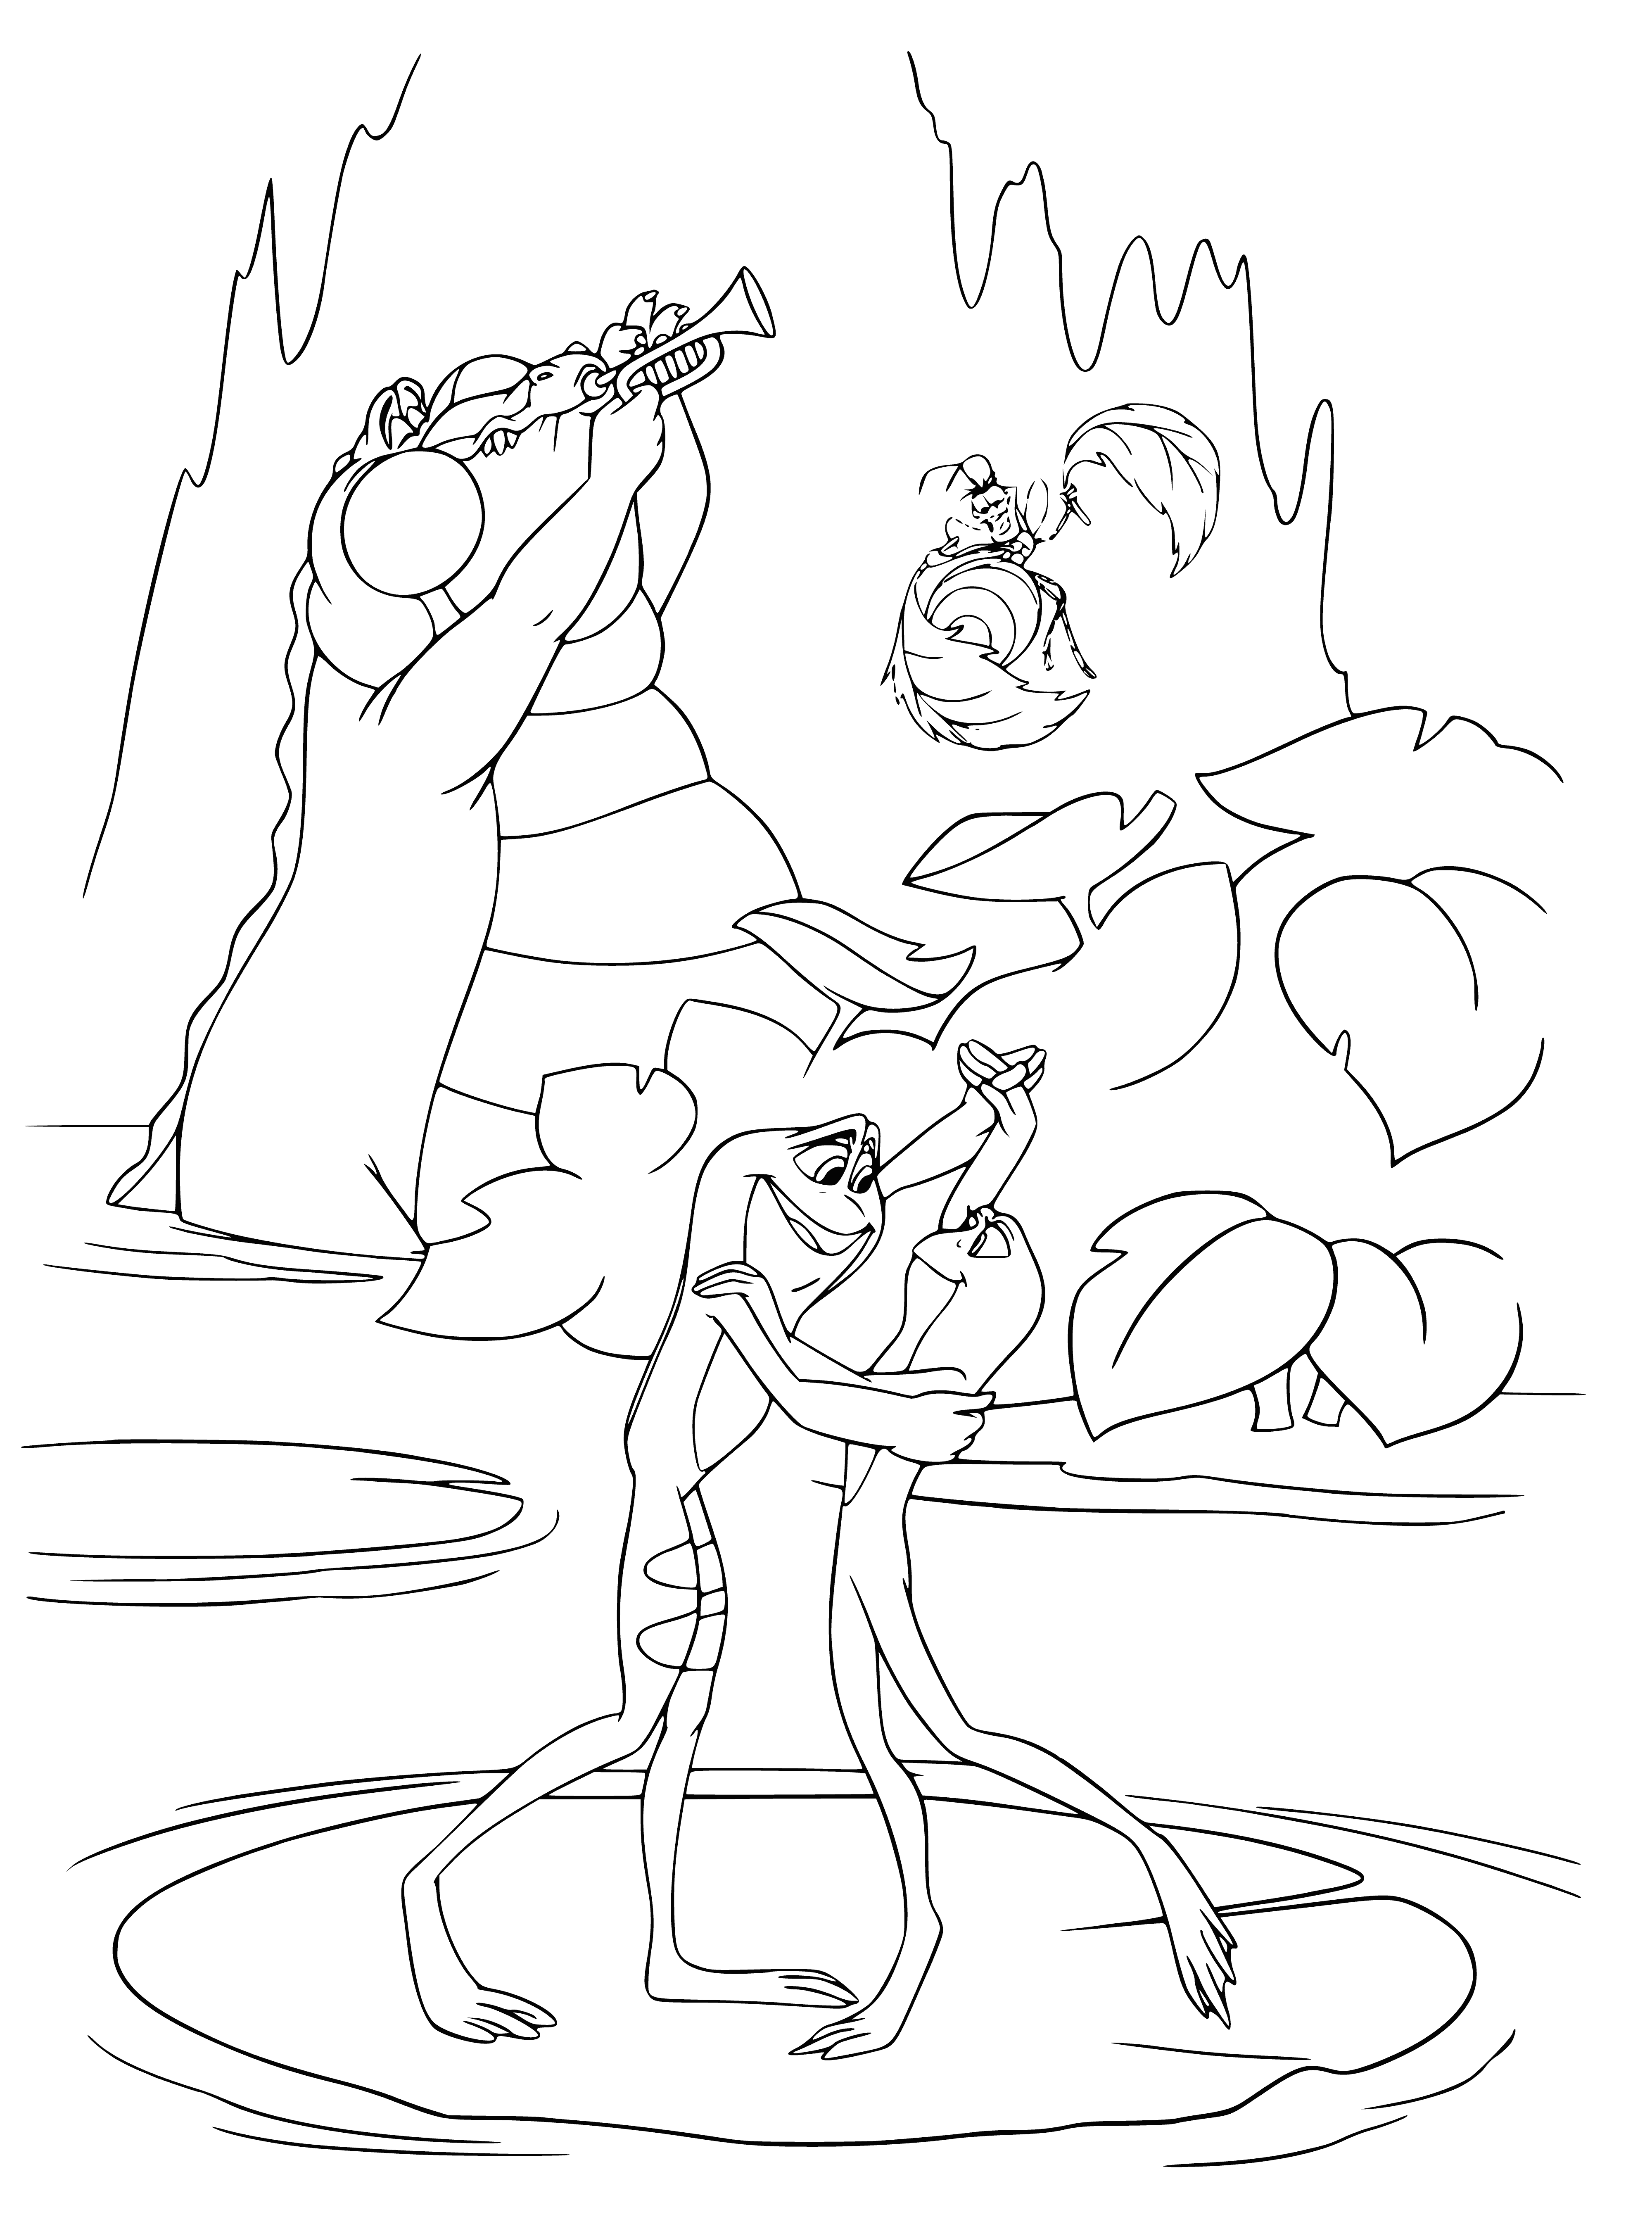 Dance of frogs coloring page